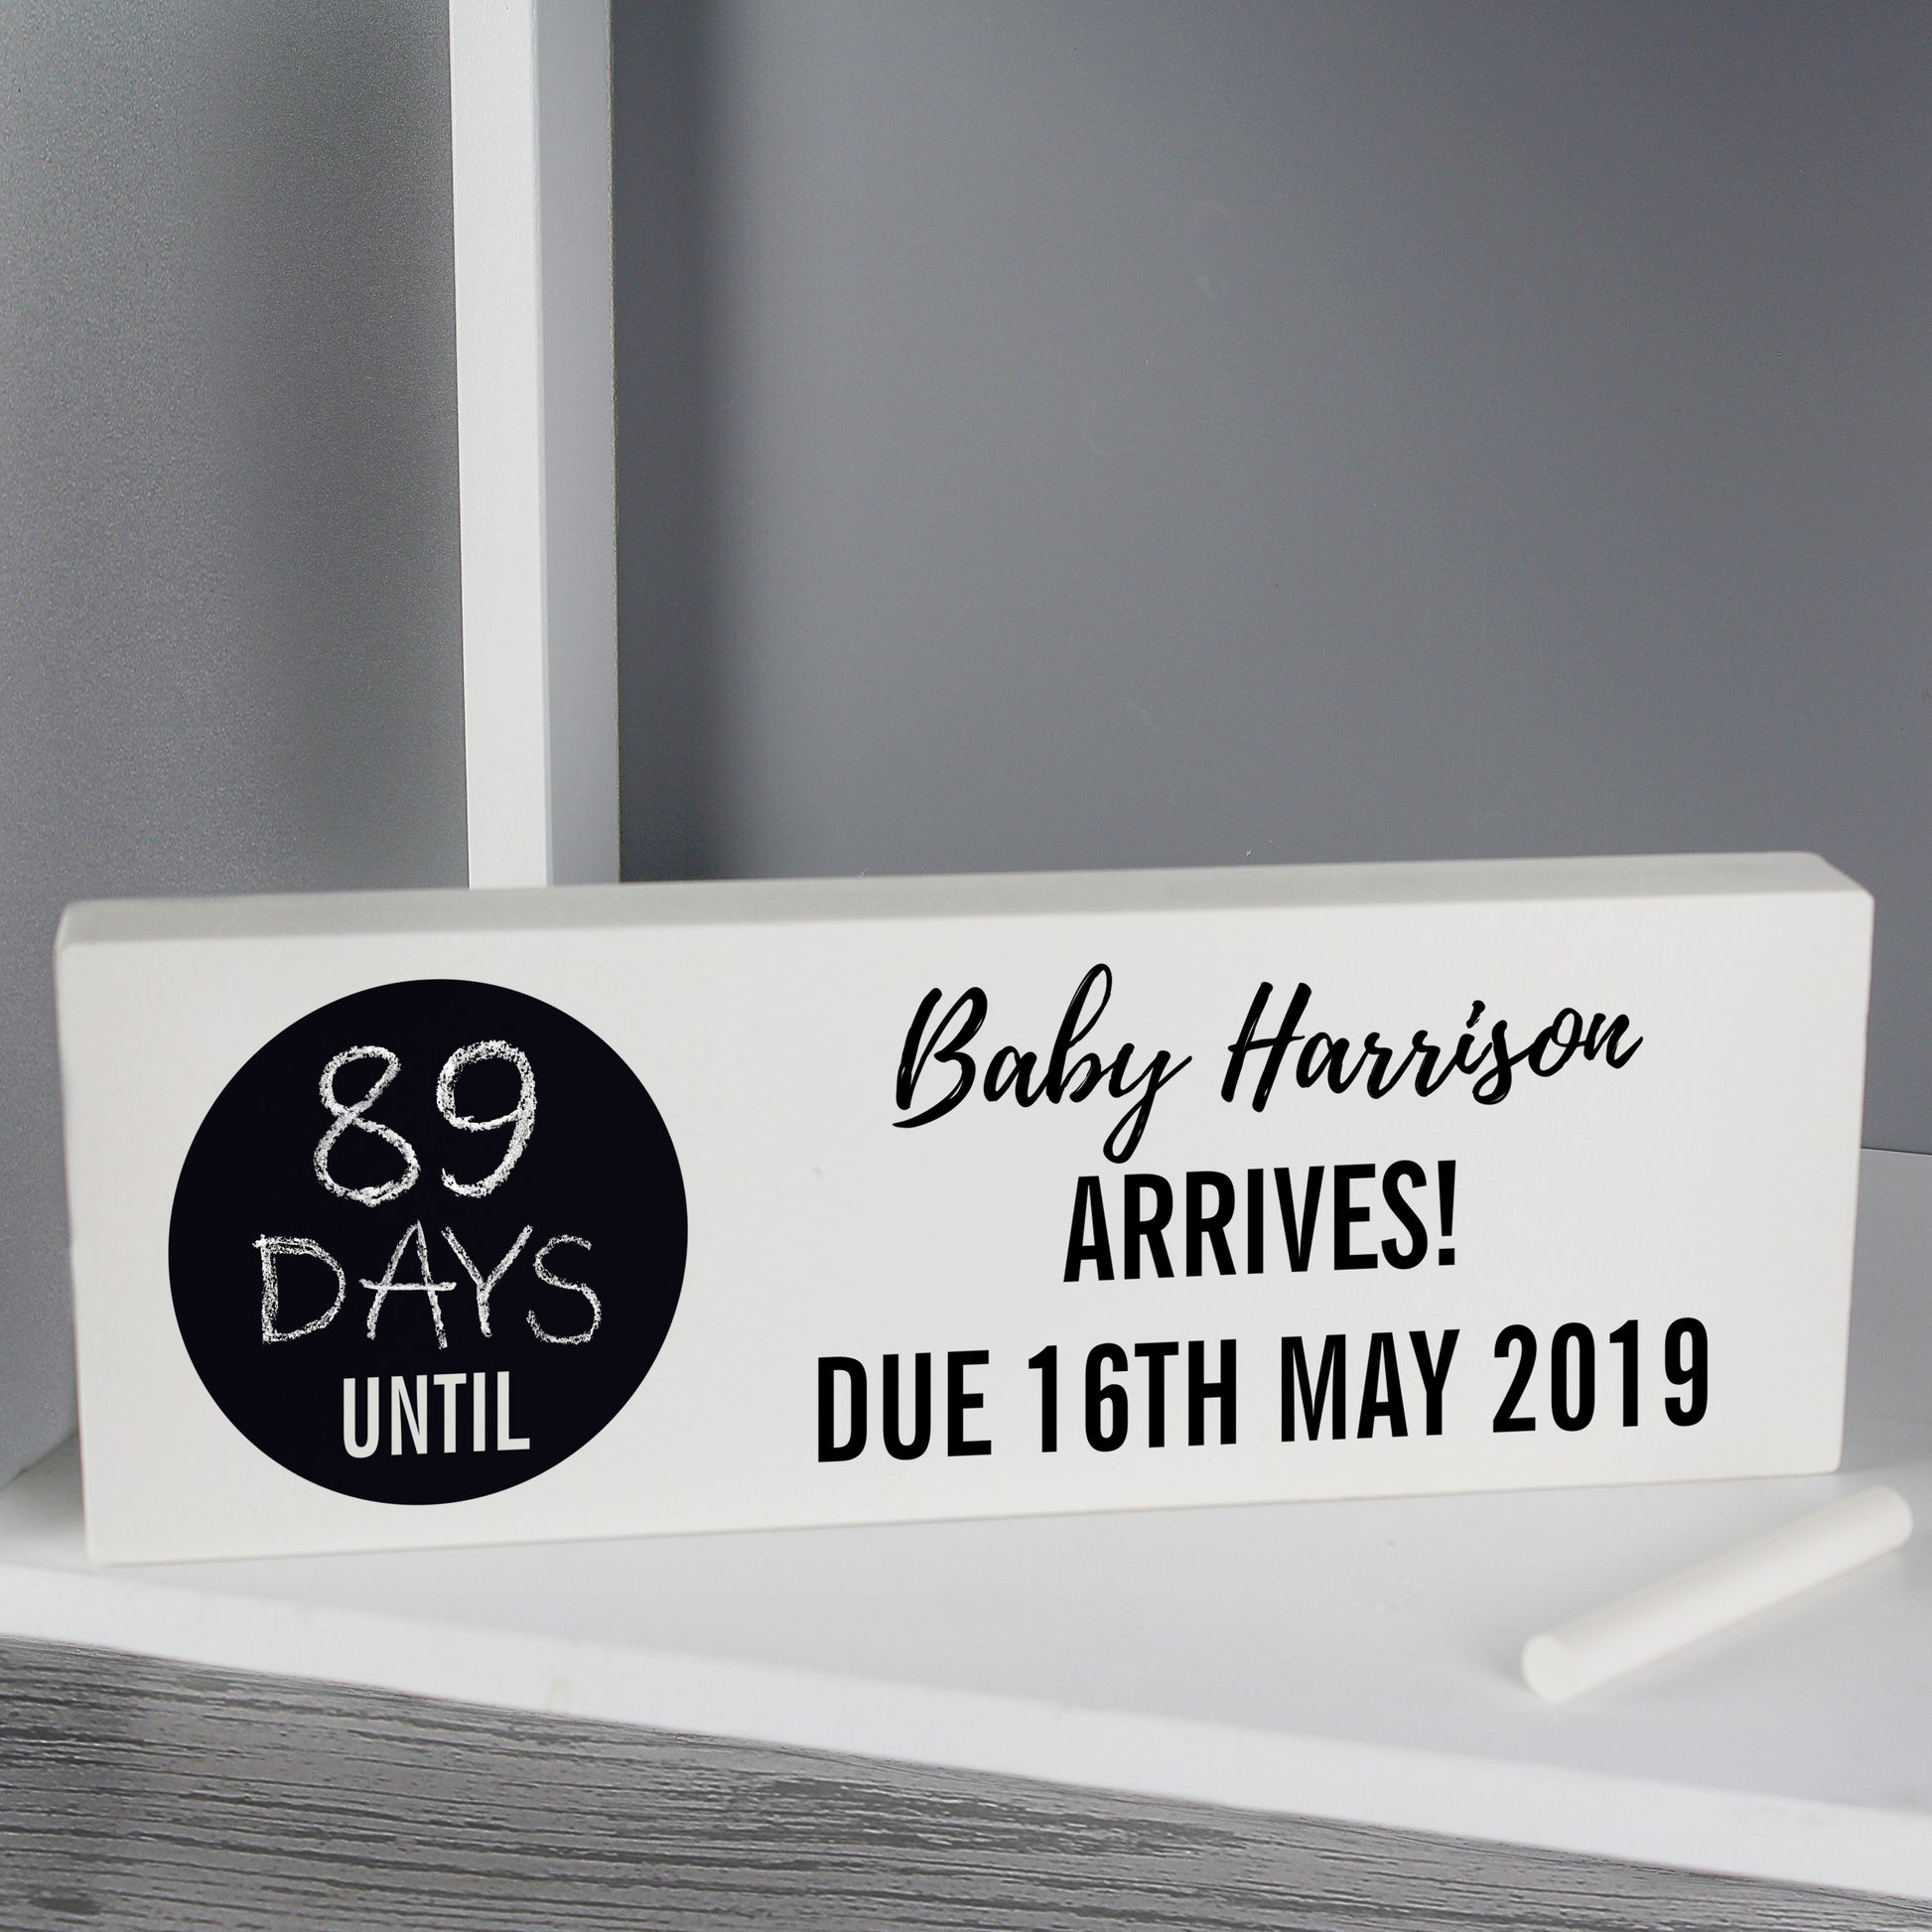 Personalised Countdown Block - Ideal For Any Key Events - Violet Belle Gifts - Personalised Countdown Block - Ideal for Weddings, Babies, Key Events